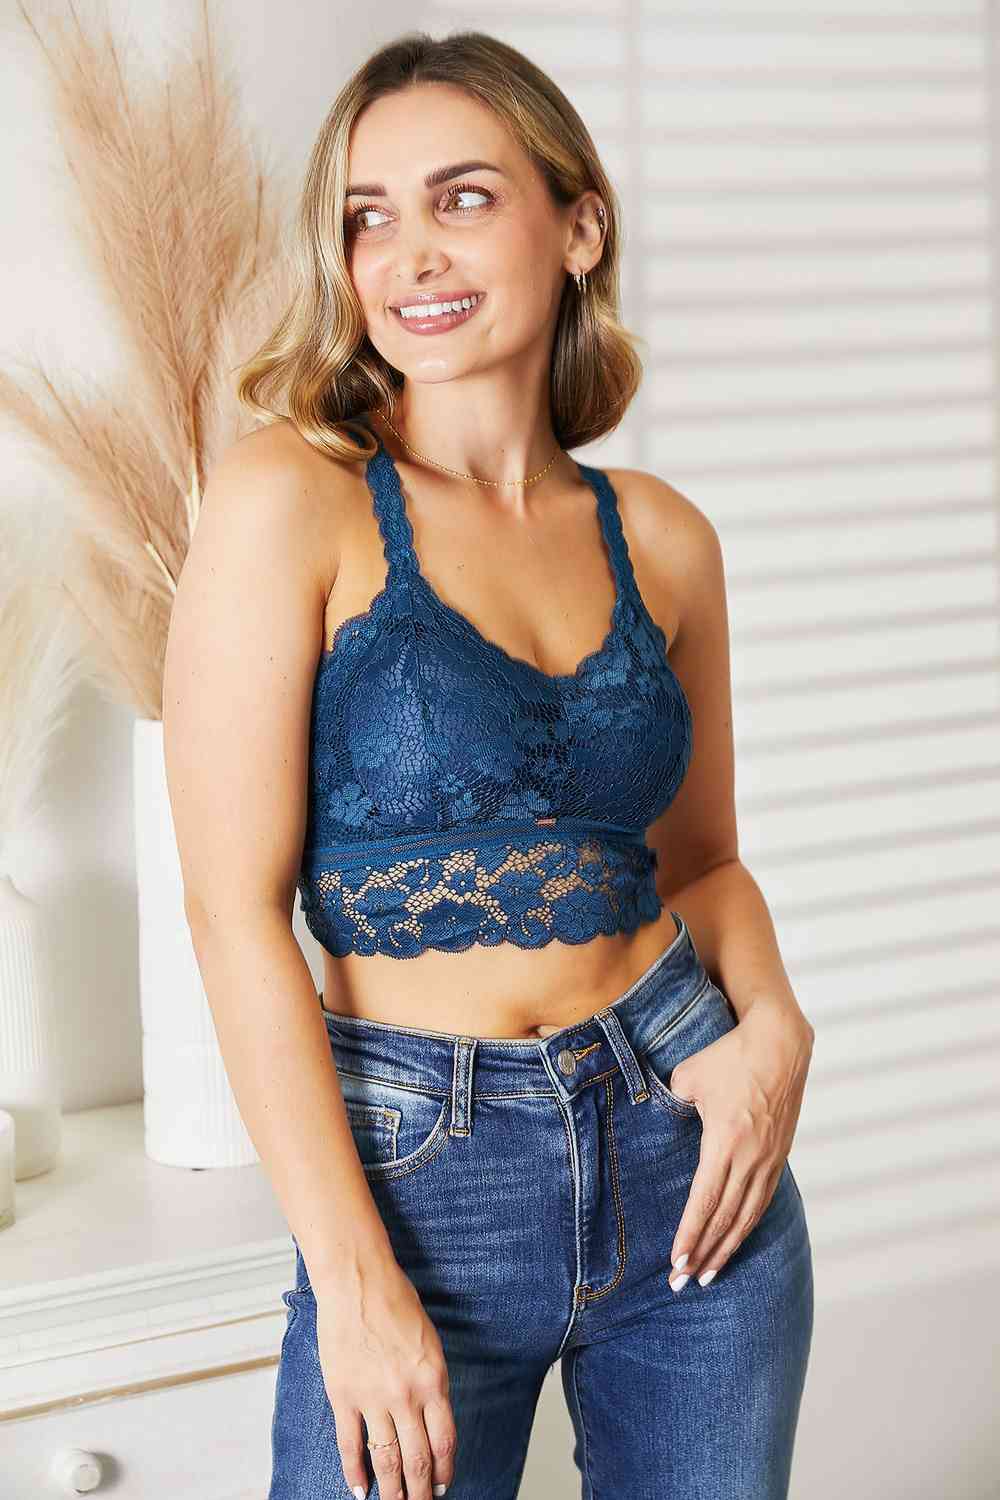 Full Size Crisscross Lace Bralette - Kawaii Stop - Allure, Alluring Appeal, Captivating, Comfortable Support, Confidence, Empowerment, Enhance Your Beauty, Everyday Elegance, Feminine, Intimate Wear, Intricate Detailing, Intricate Lace, JadyK, Lace Bralette, Secret Weapon, Seductive, Sensual Lingerie, Ship from USA, Stylish